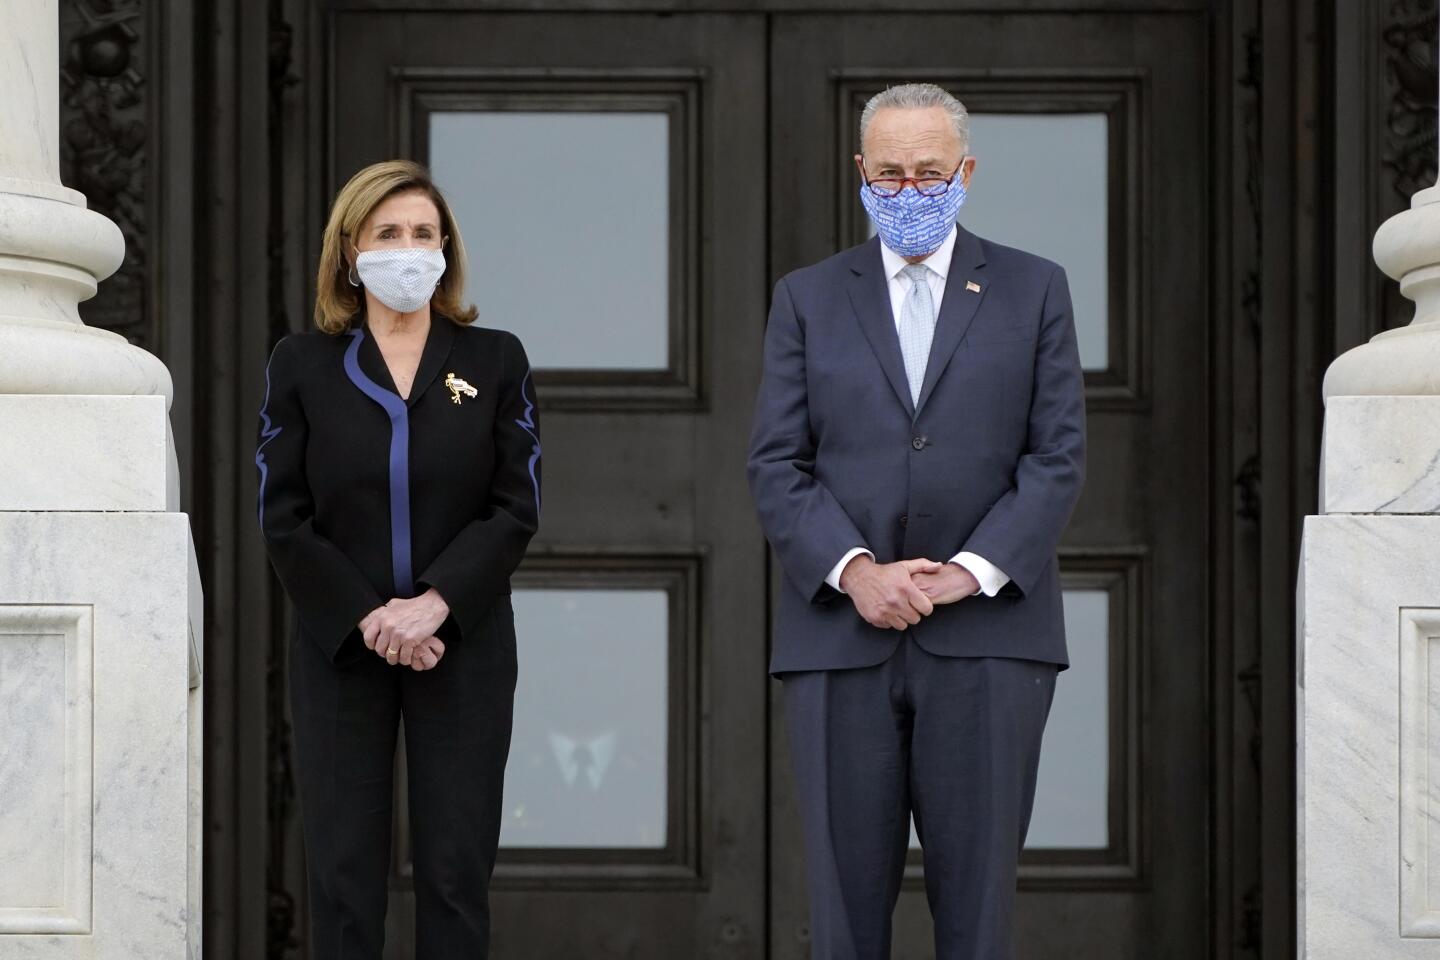 Speaker Nancy Pelosi and Sen. Charles E. Schumer await arrival of the casket of Justice Ruth Bader Ginsburg at the Capitol